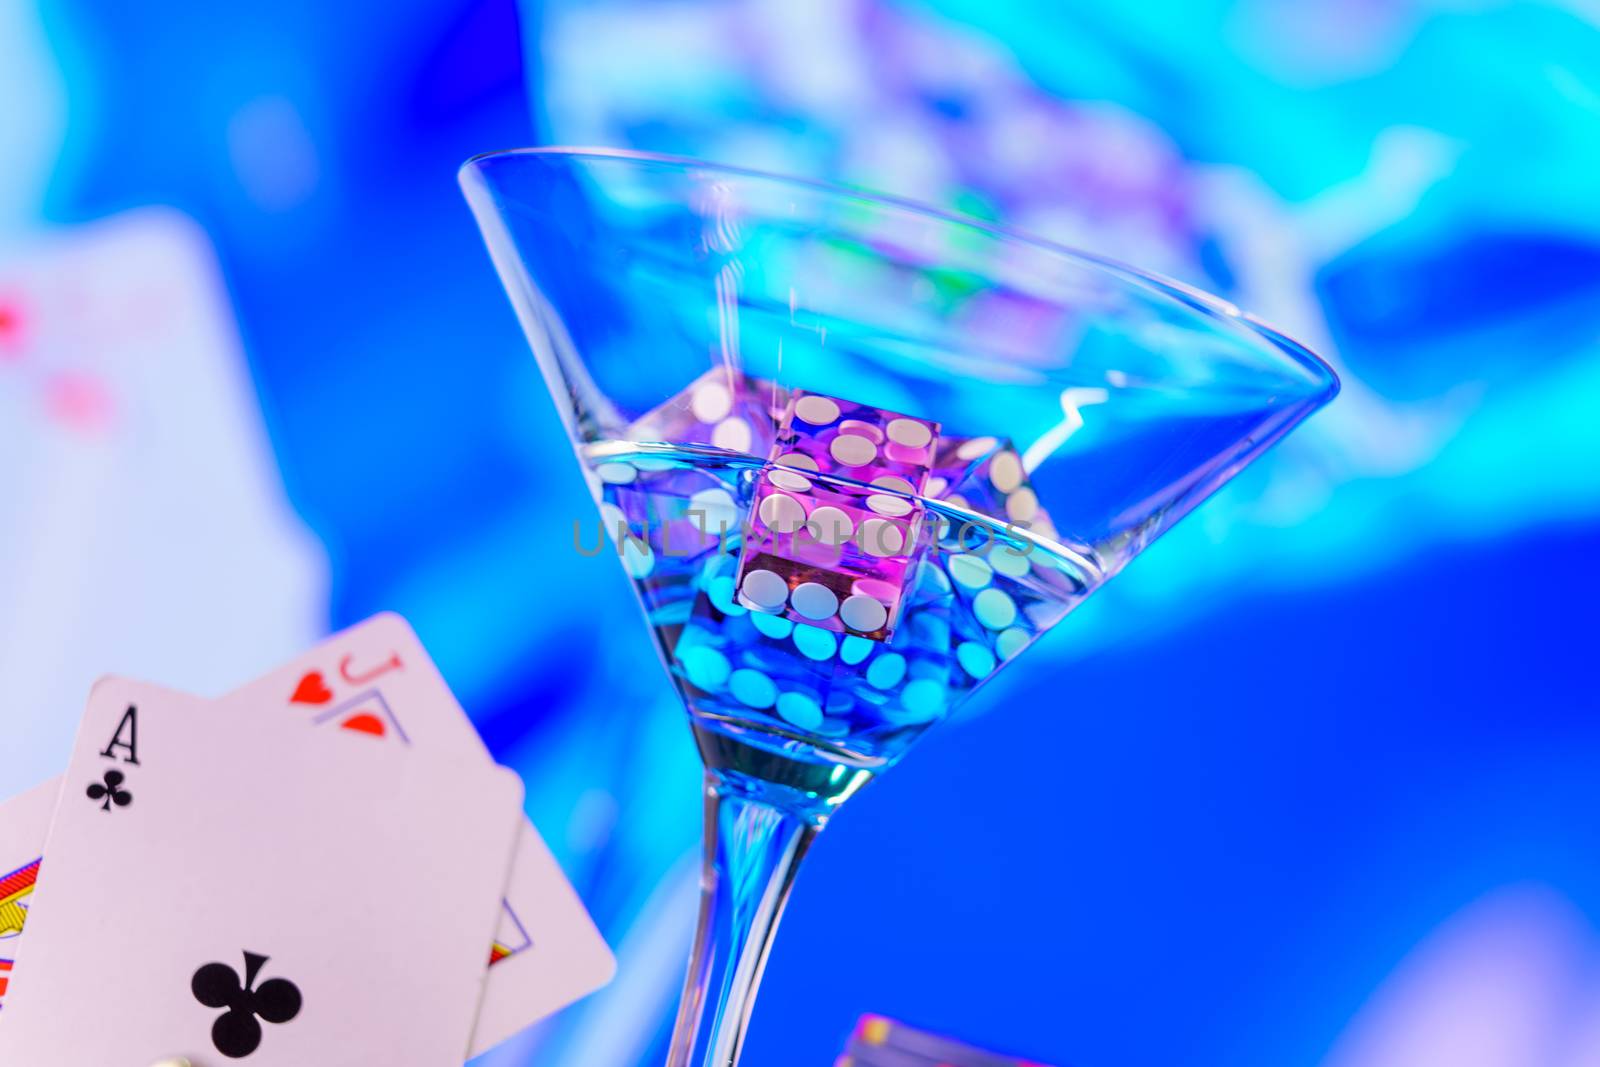 Craps dice in cocktail glass on the casino gambling table